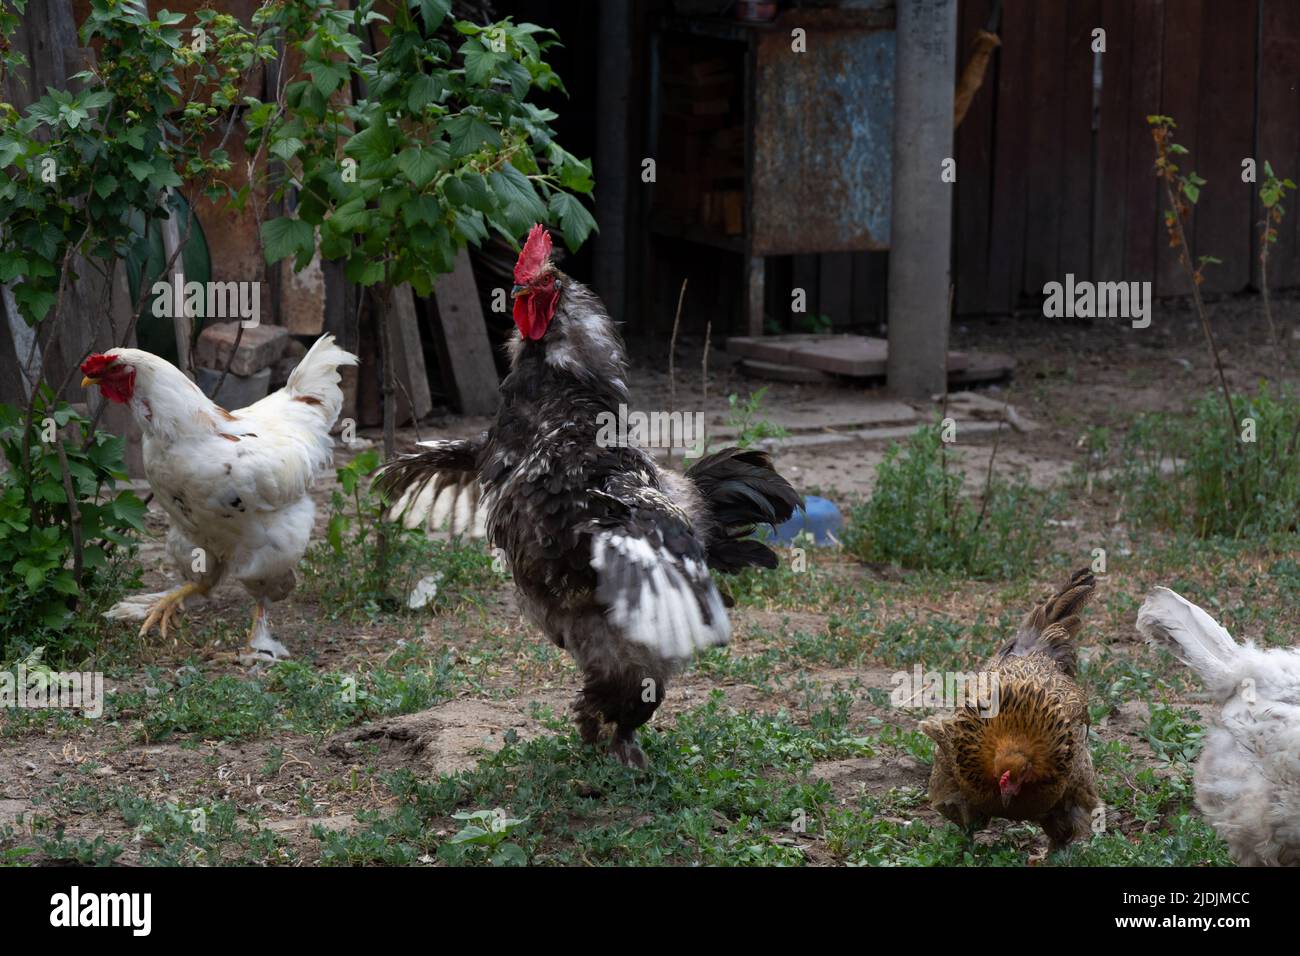 Rooster spread its wings. Rooster and chickens free range. Backyard Chickens Stock Photo